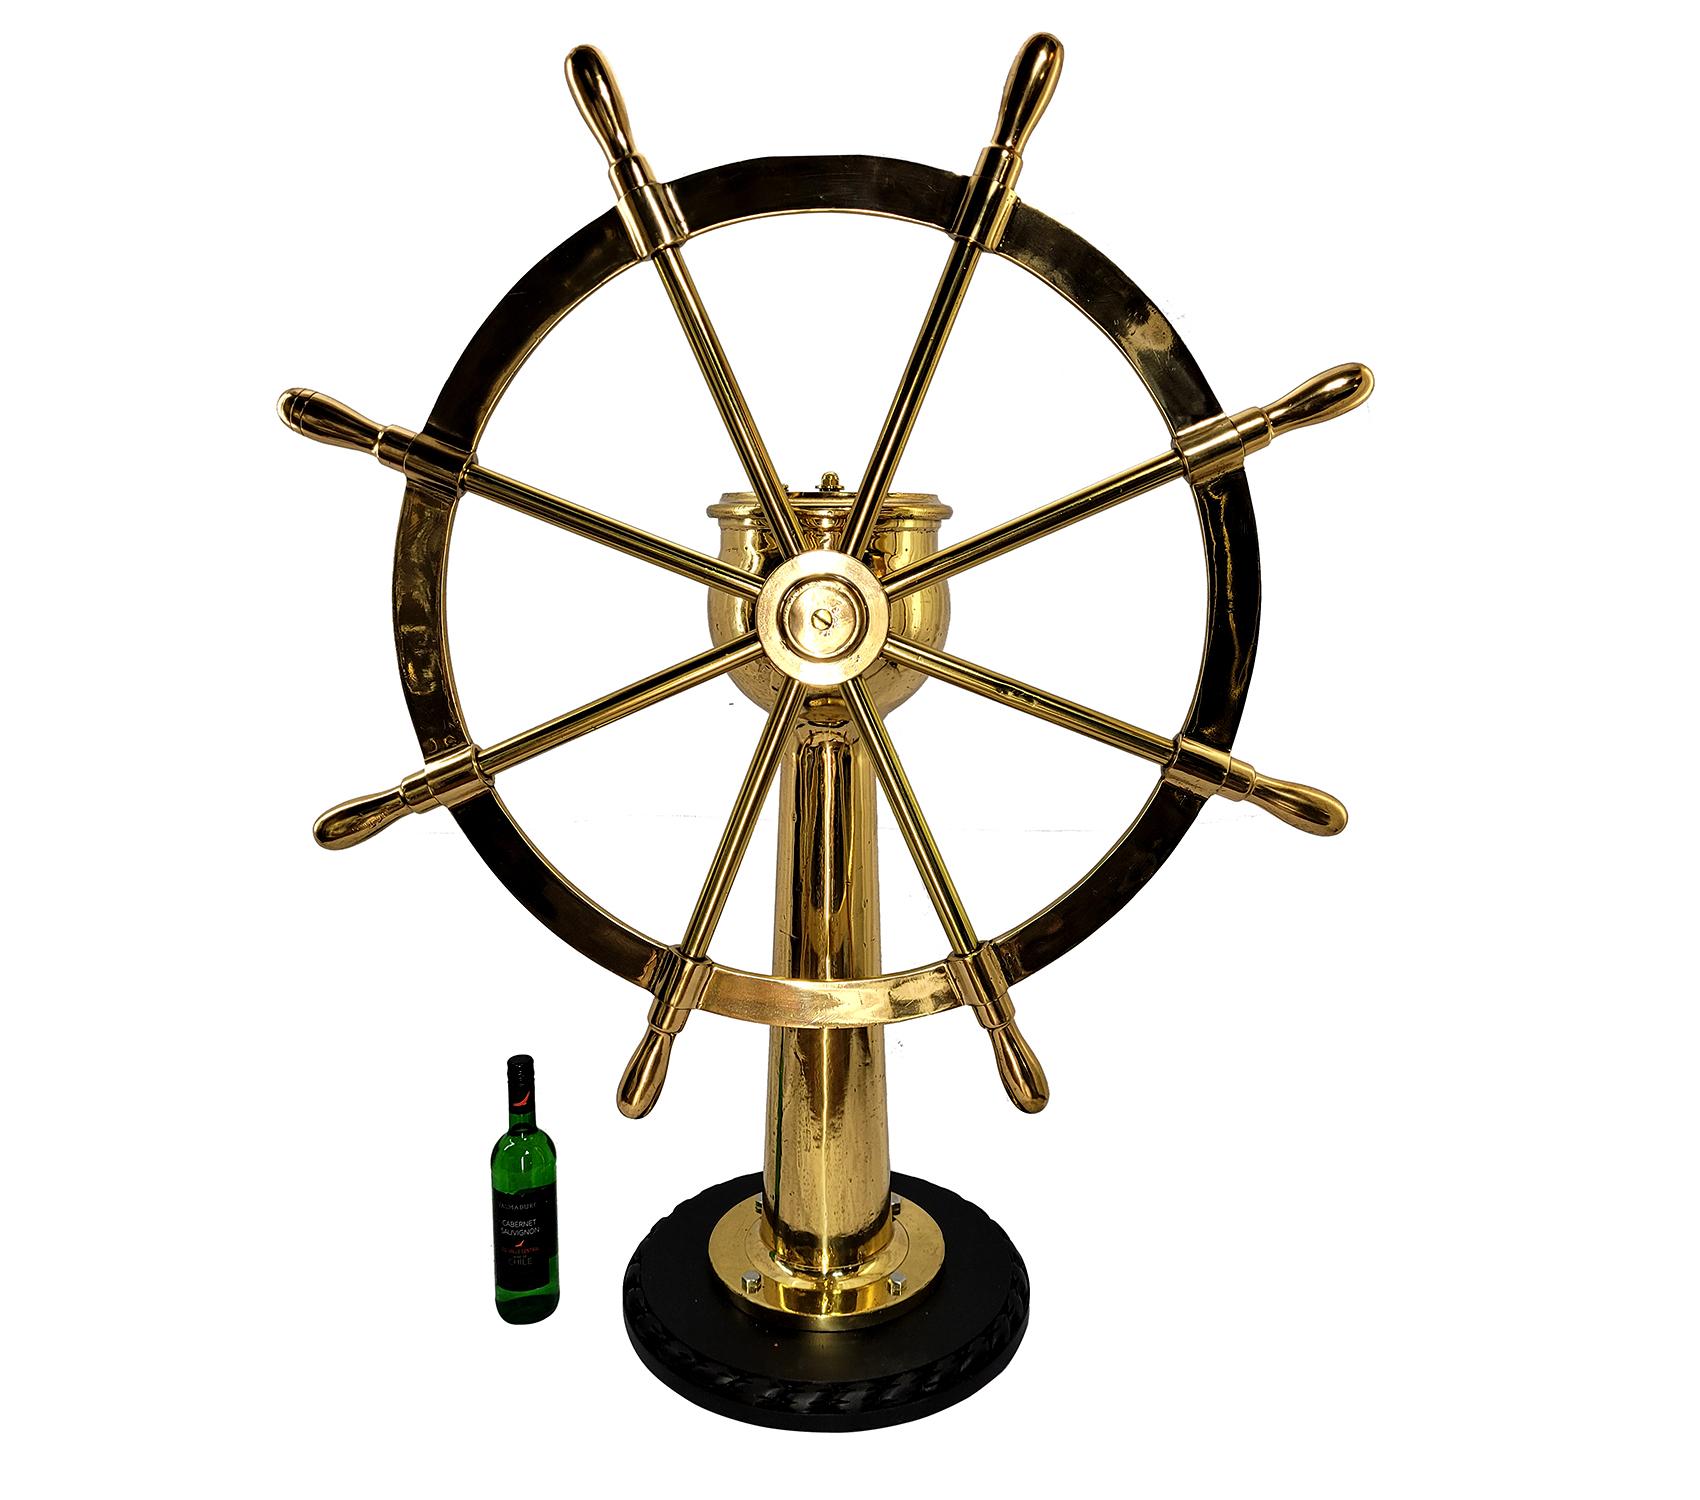 Very impressive eight spoke ships wheel mounted to a geared pedestal. The pedestal head is engraved Dake Engine Company, Grand Haven Michigan, Serial number 7823 with rudder indicator arrow. Entire unit has been meticulously polished and lacquered.